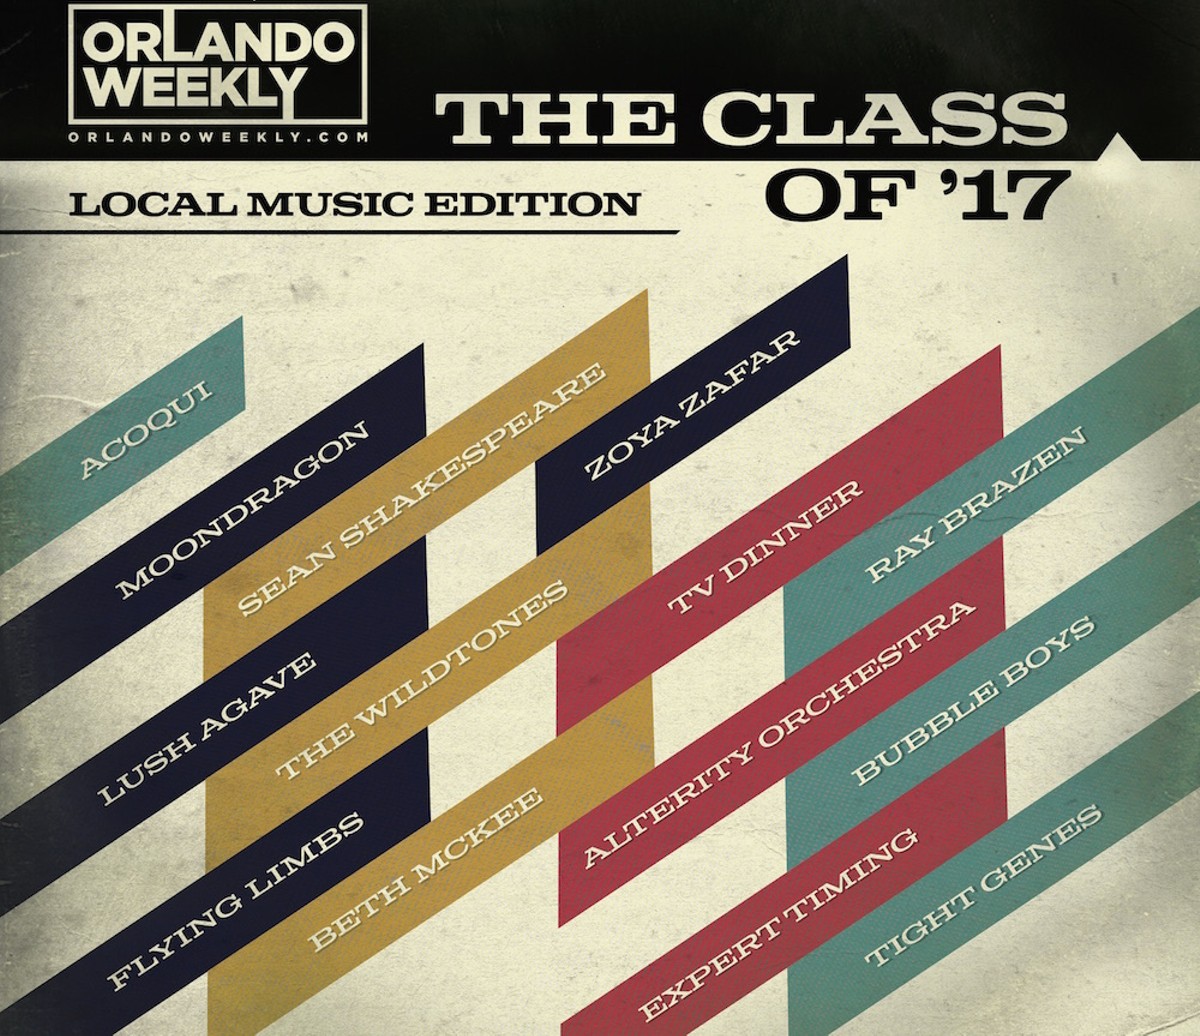 14 local artists who are reshaping the Orlando music scene